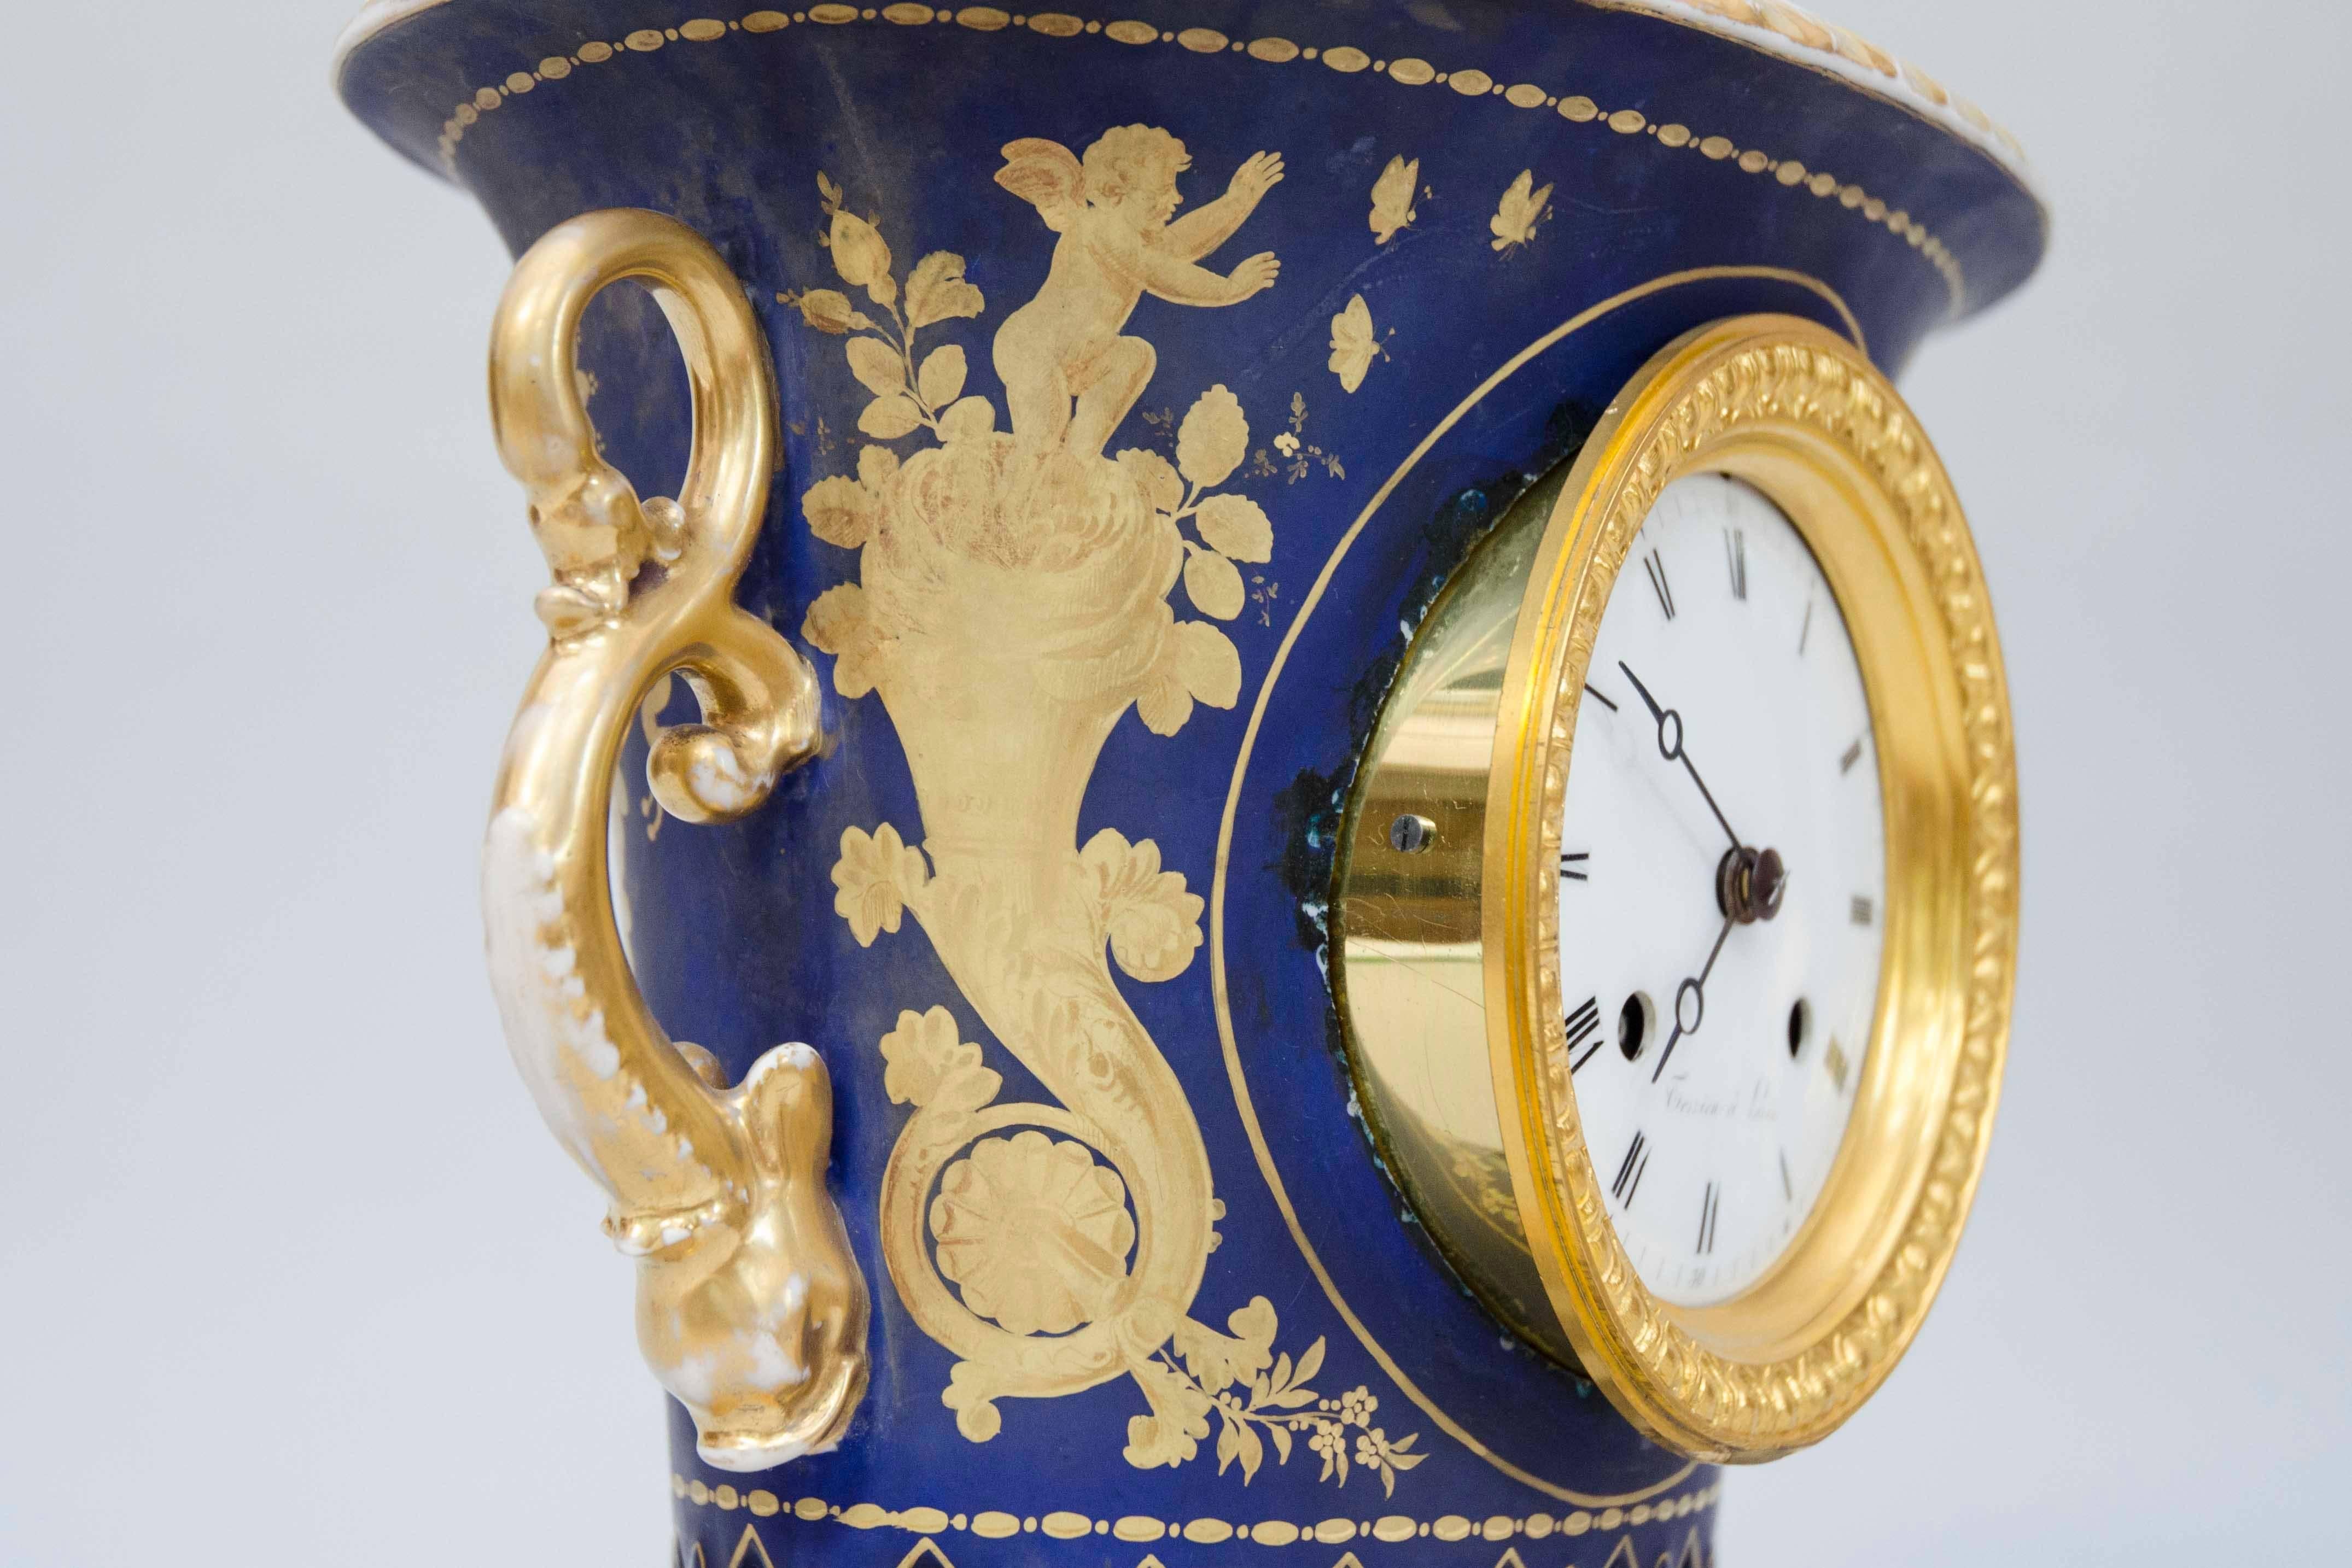 Empire Darte Porcelain Vase Clock with Lapis Bleu Ground and Gild Decorations In Good Condition For Sale In Brussels, BE